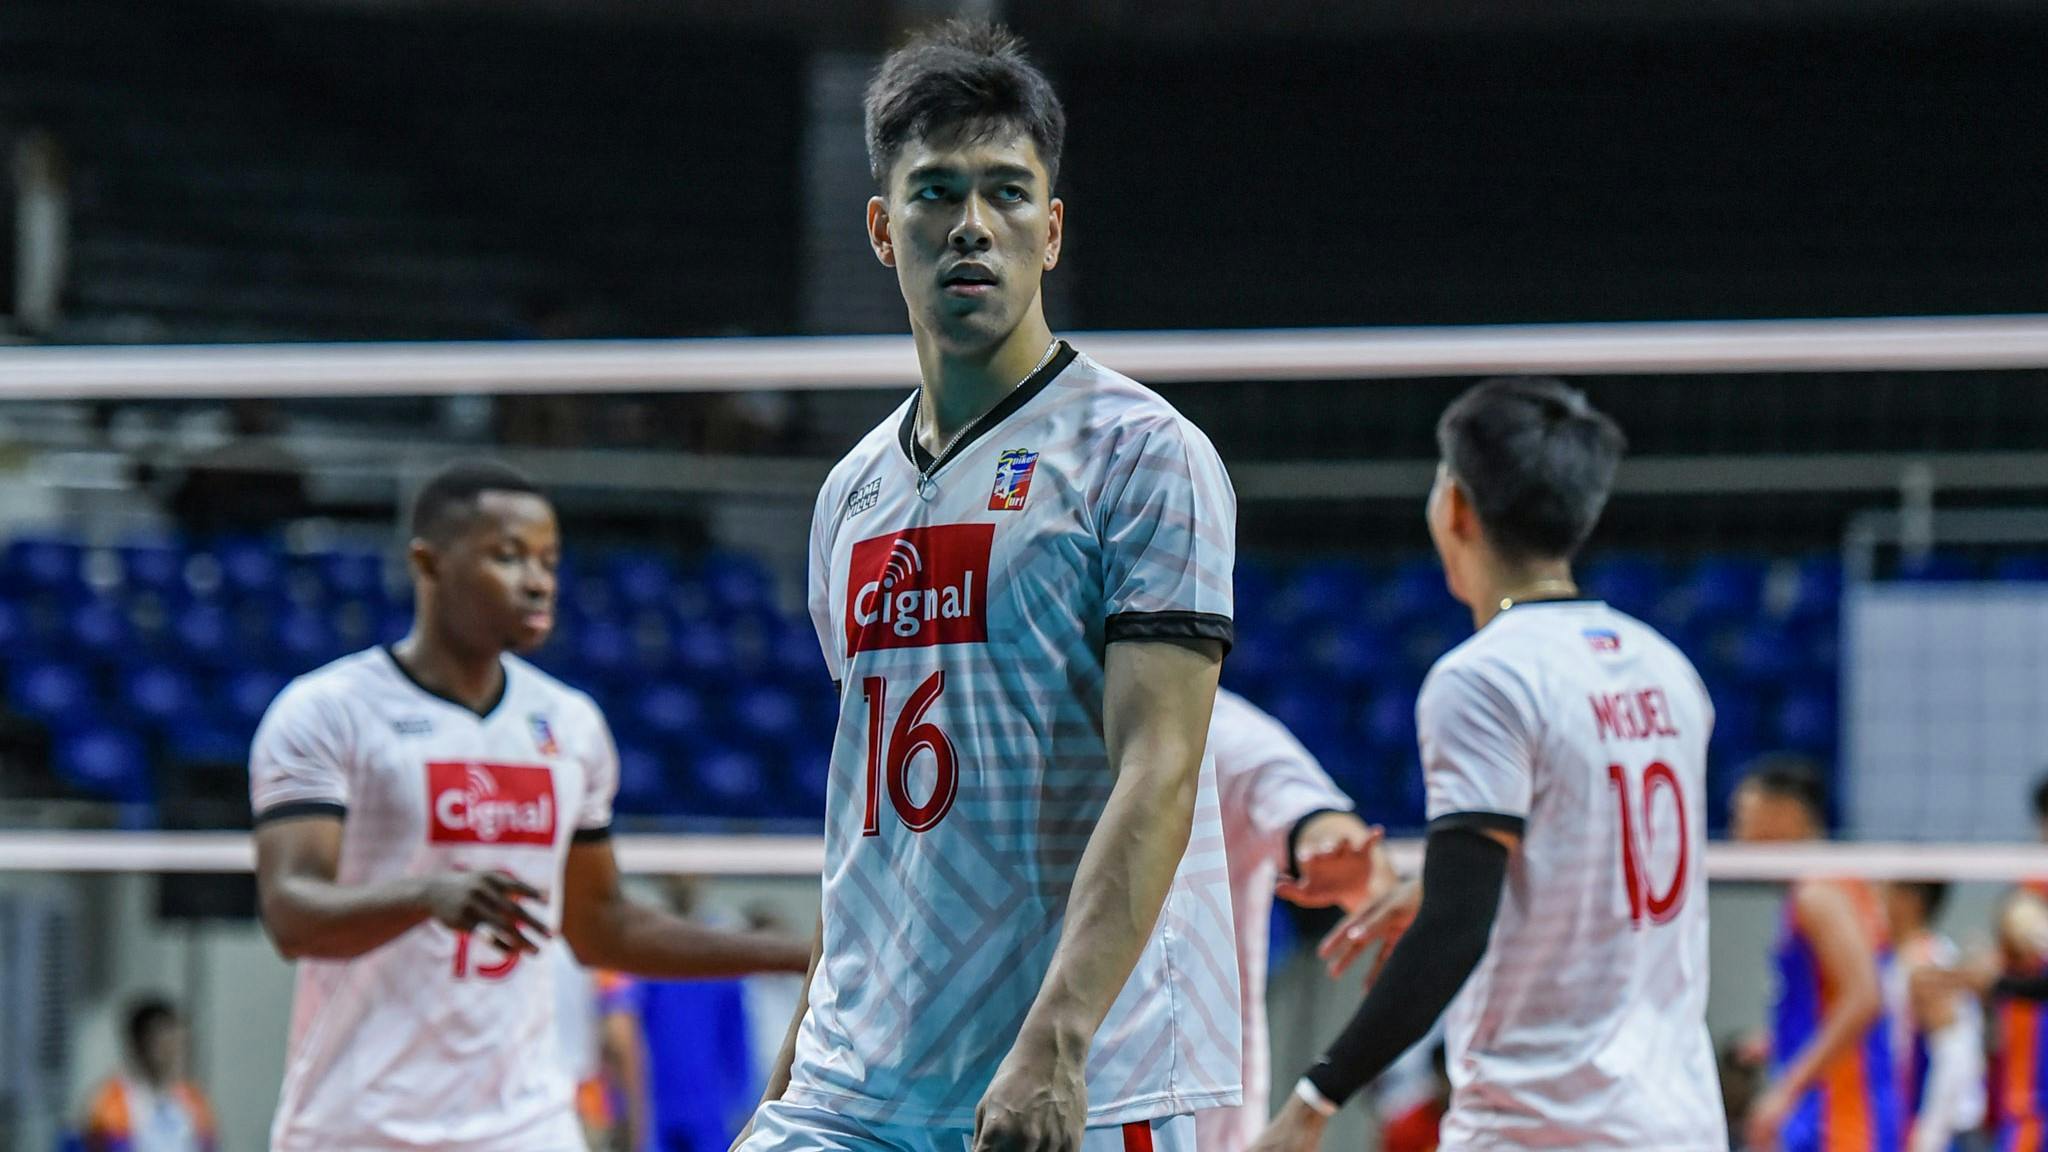 Spikers’ Turf: Bryan Bagunas, Cignal near Open Conference crown after strong win over Criss Cross